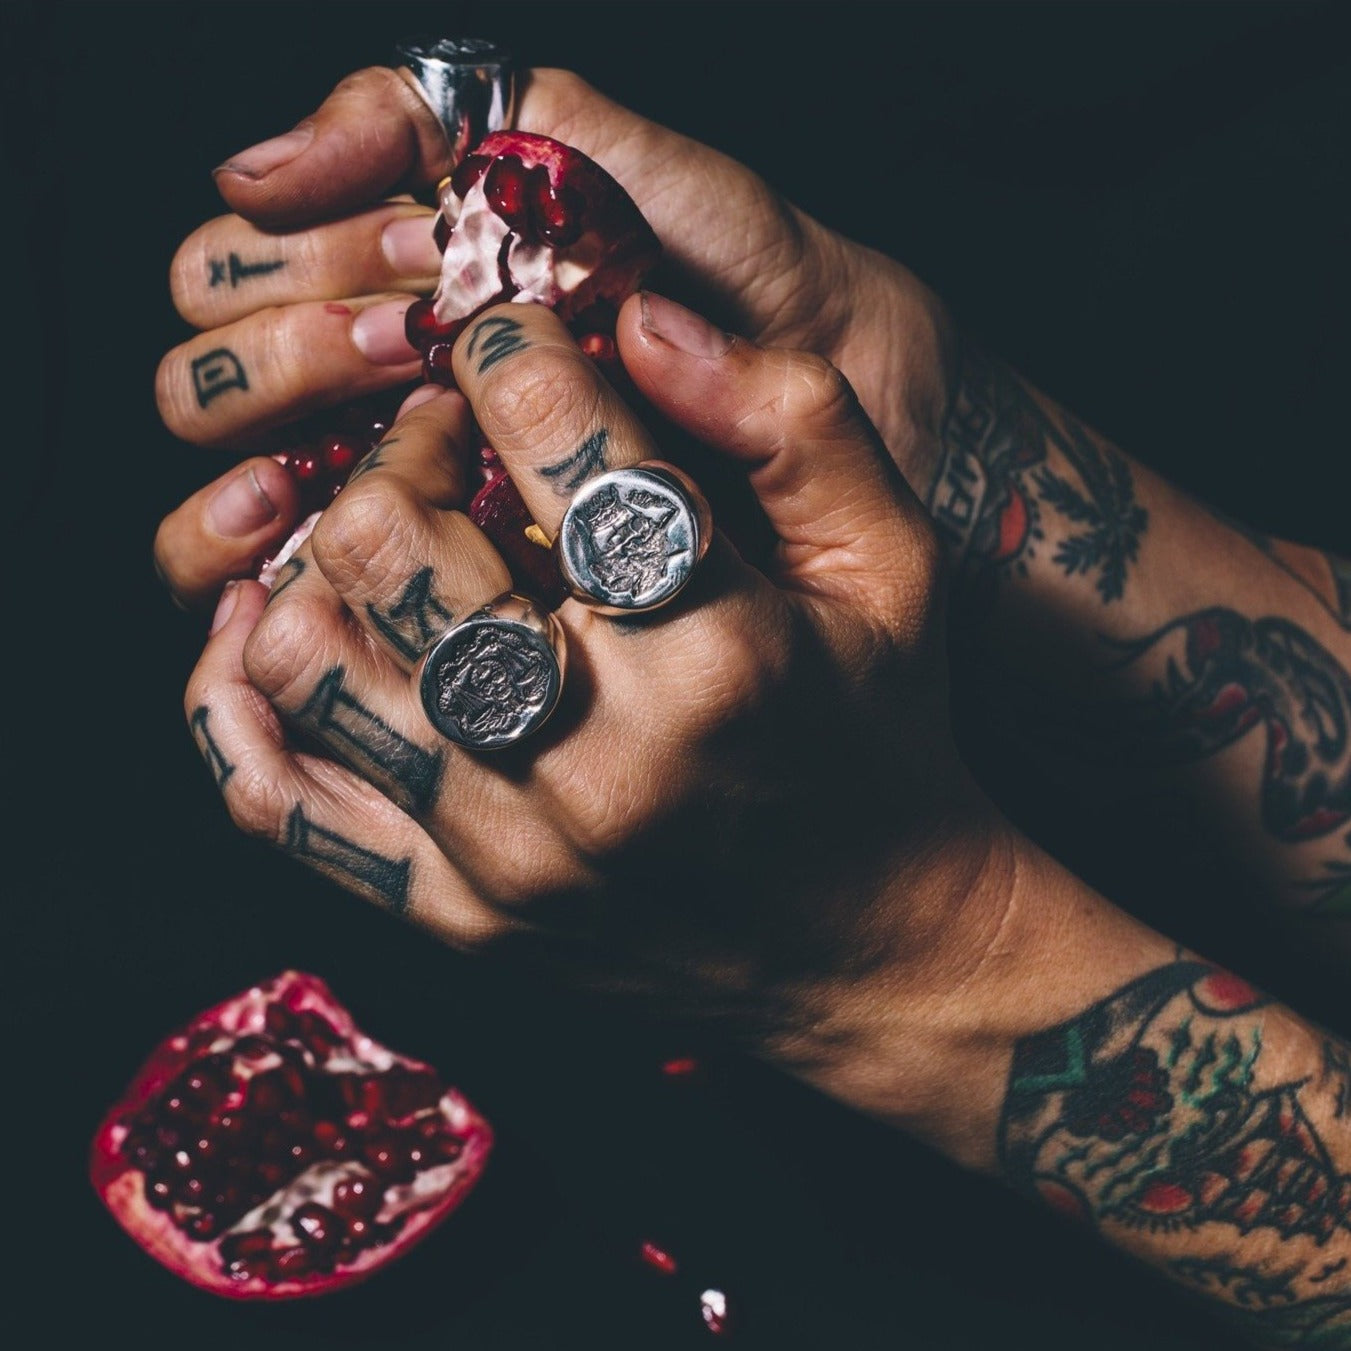 Tattooed hands with rings